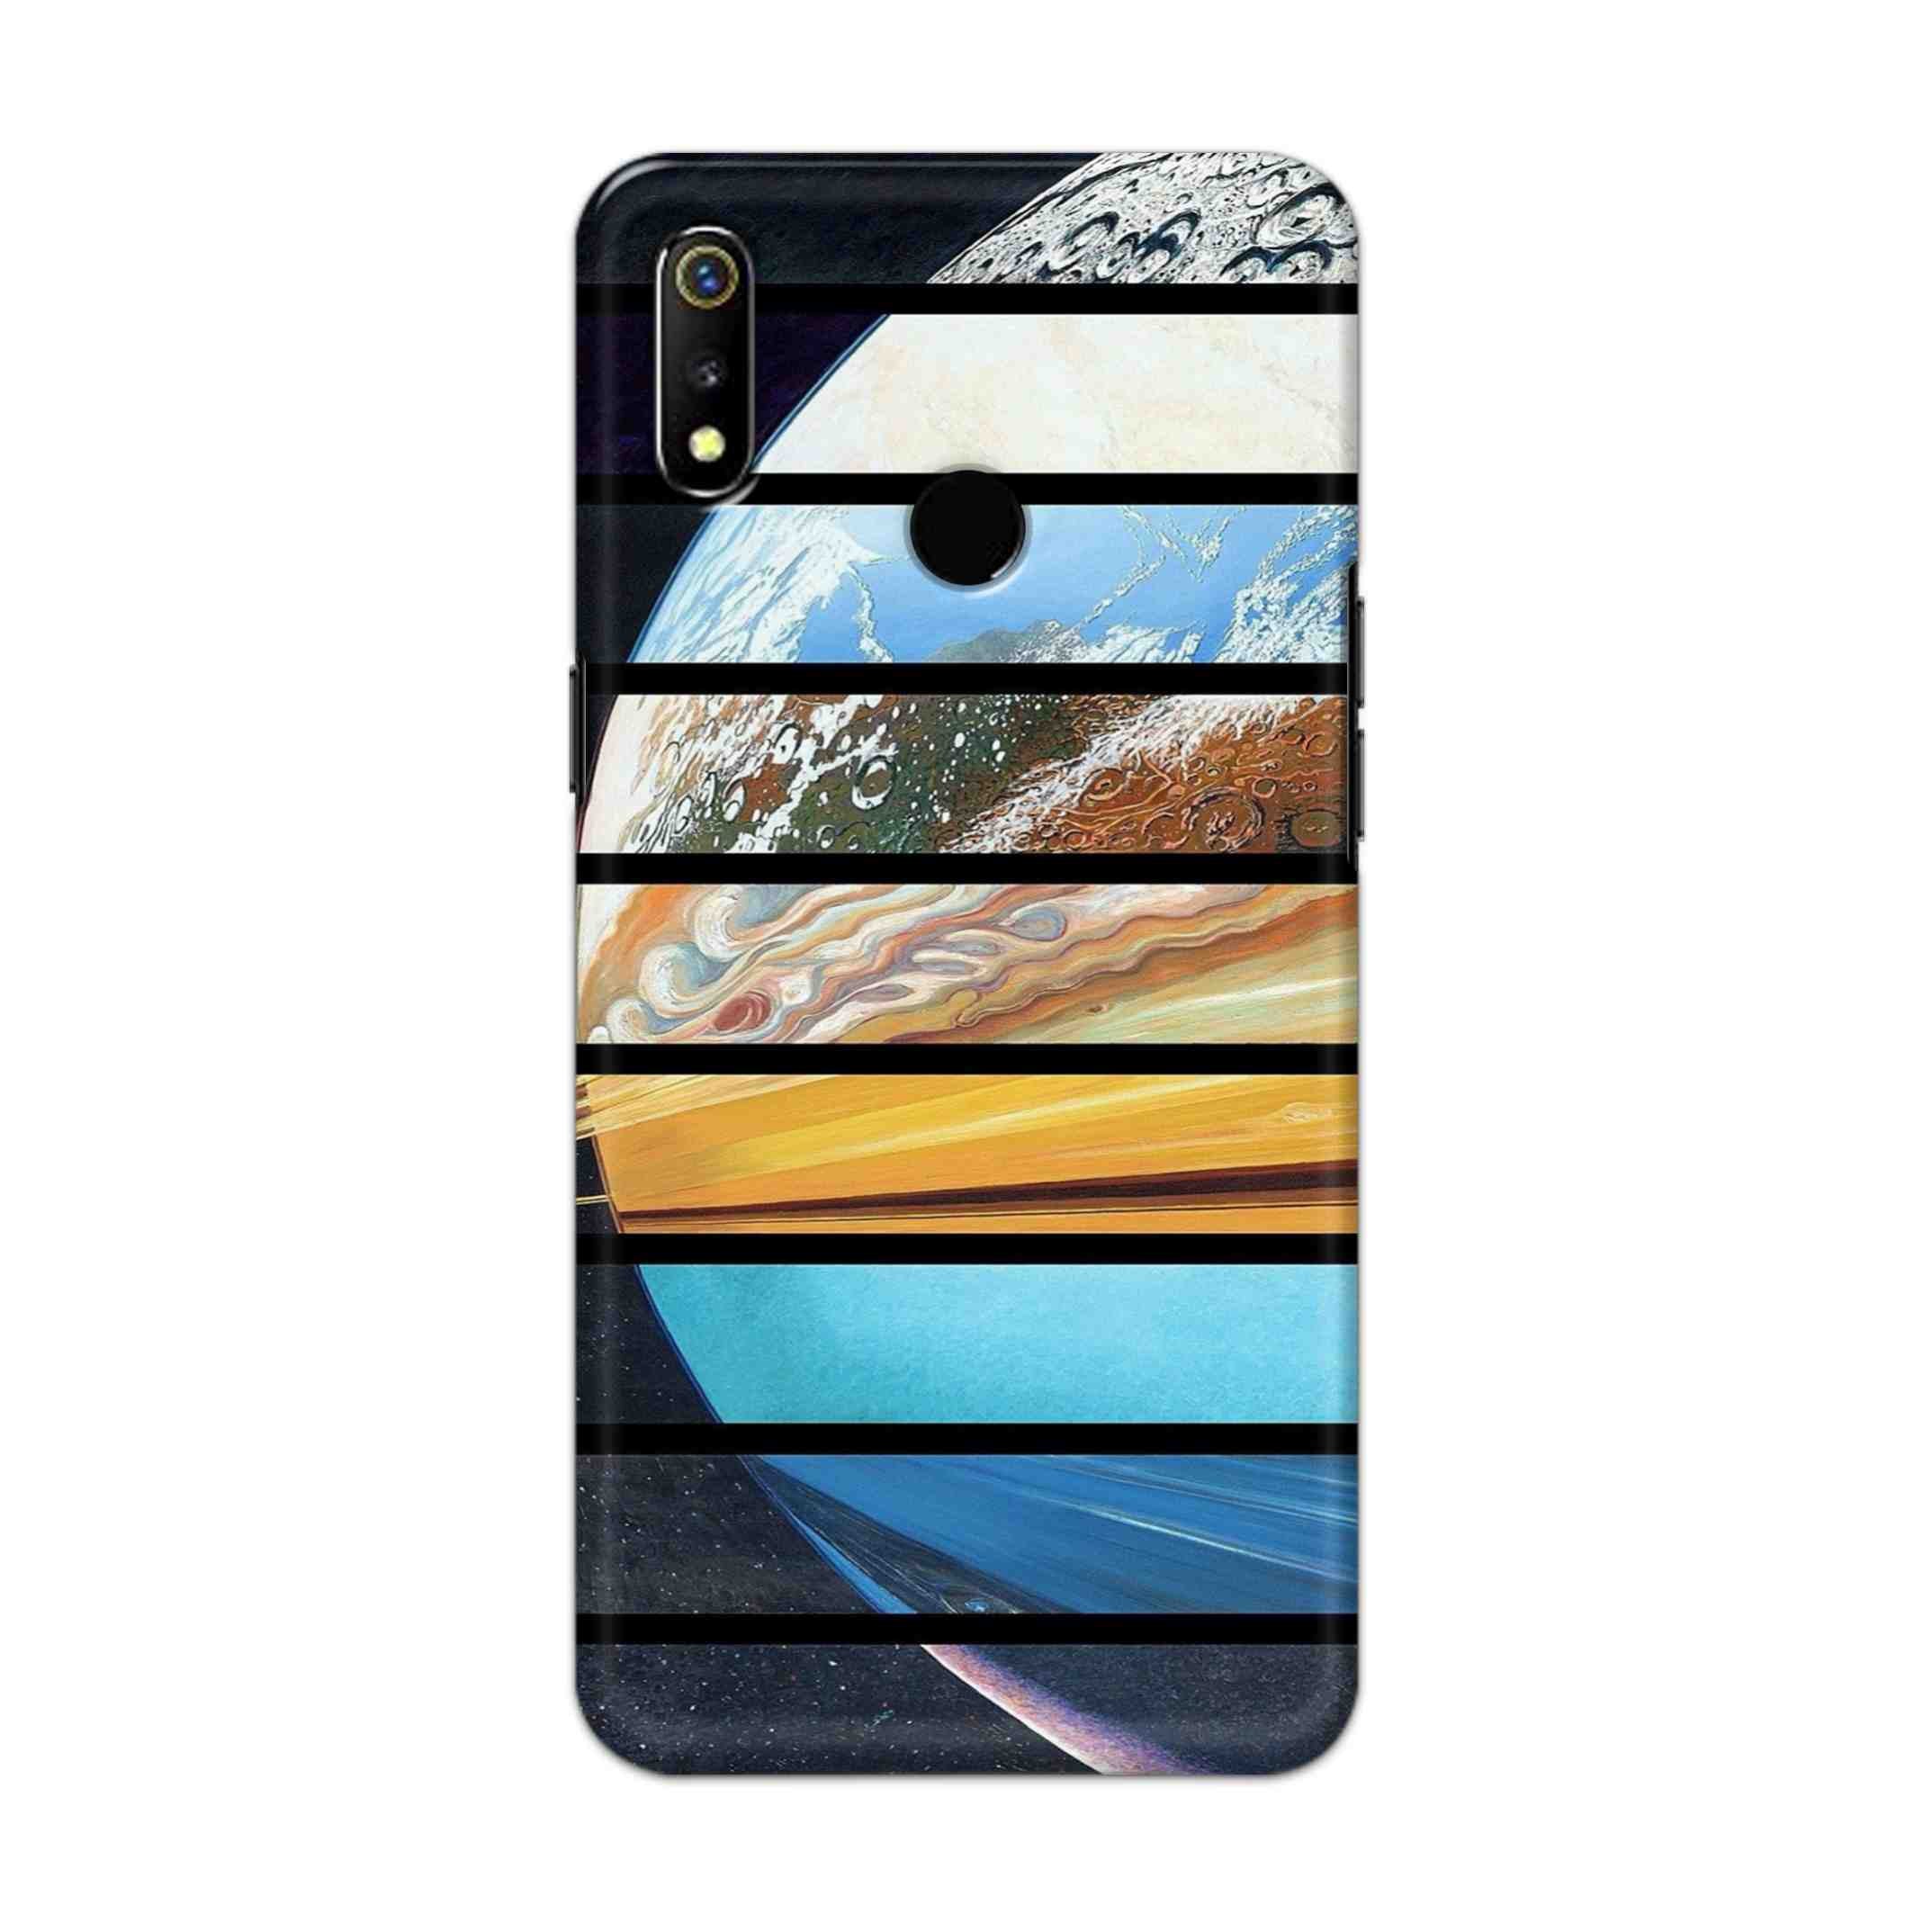 Buy Colourful Earth Hard Back Mobile Phone Case Cover For Oppo Realme 3 Online